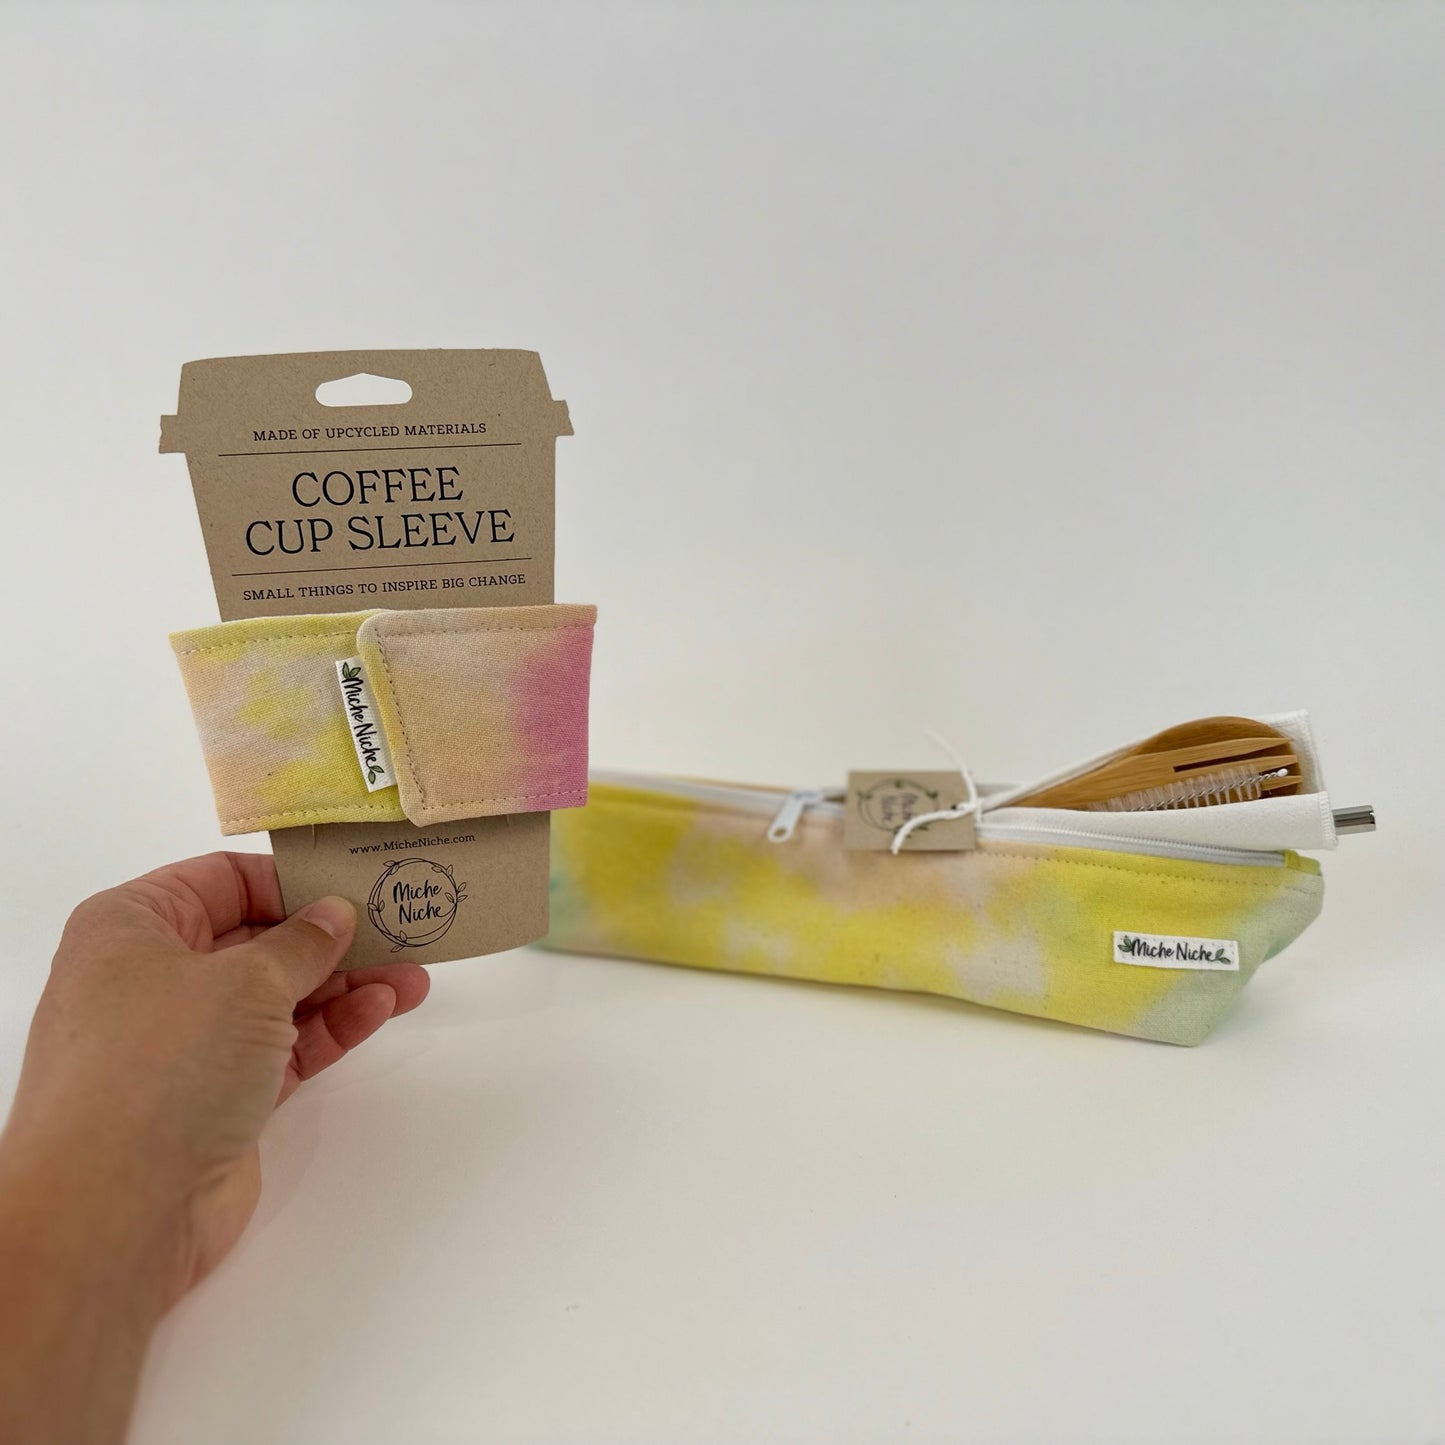 A matching set of a Miche Niche zipper pouch and coffee cup sleeve in a hand dyed pastel yellow, green, and pink tie dye pattern